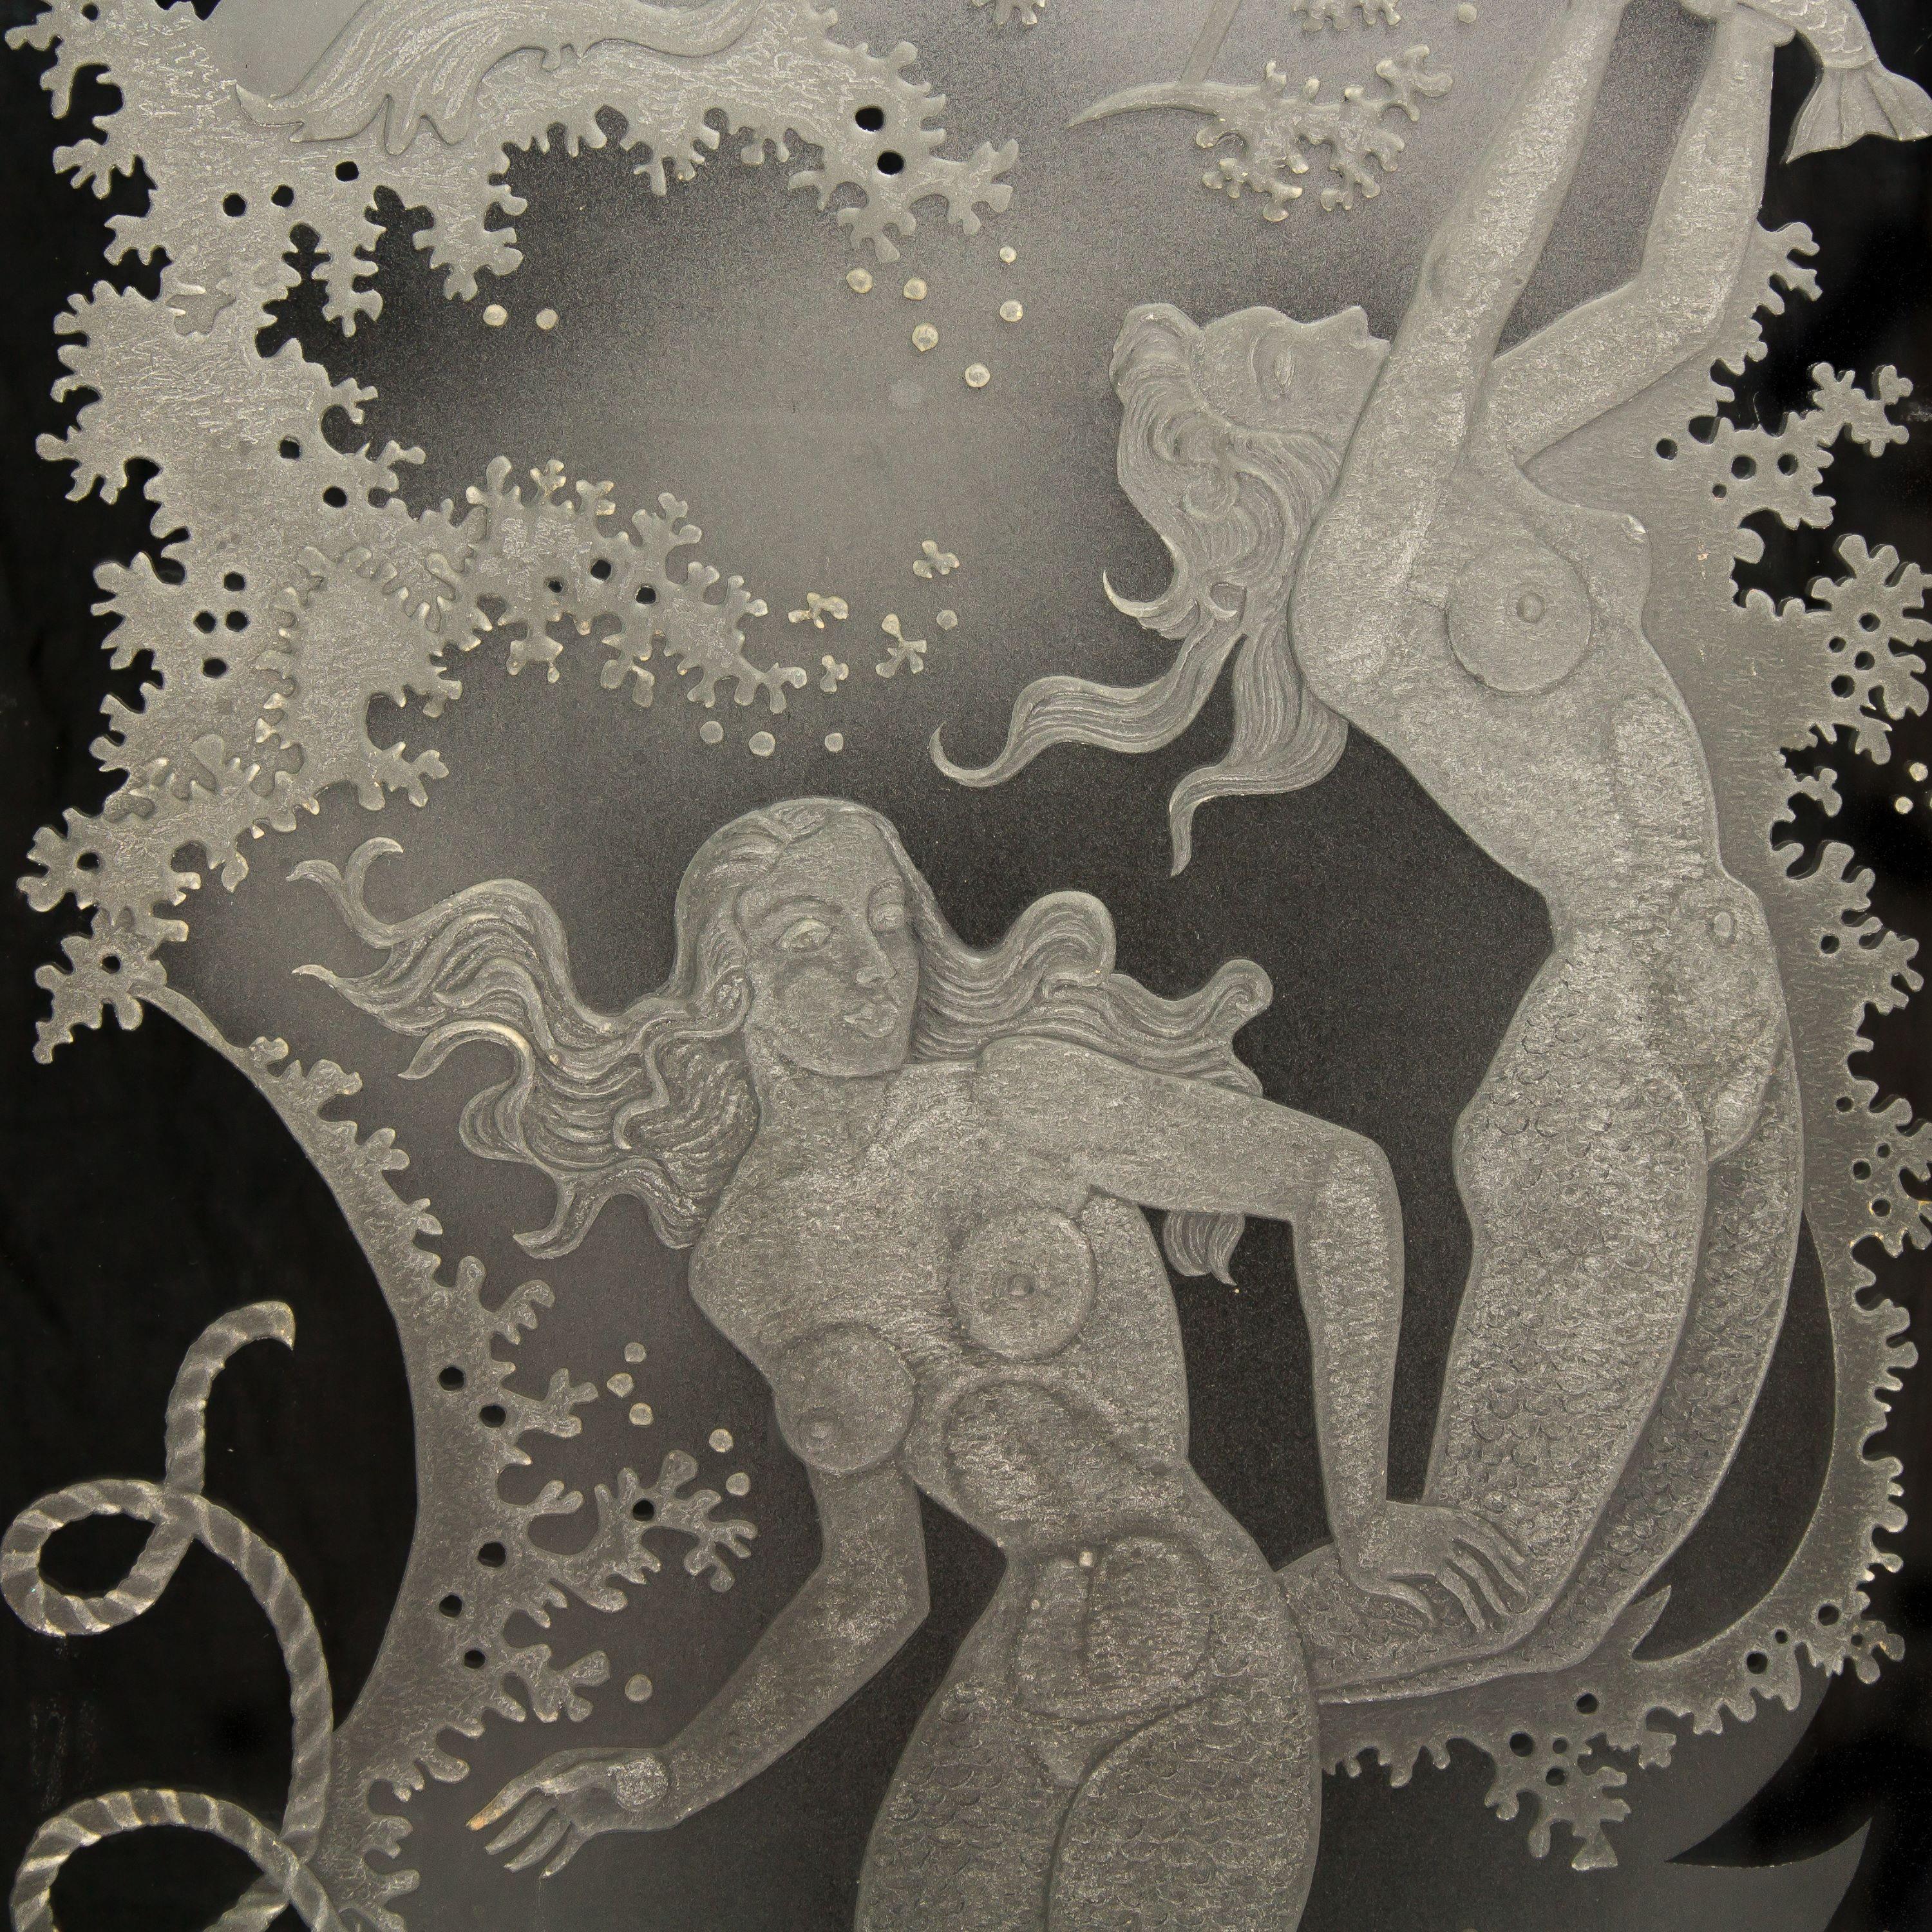 The thick sandblasted, etched and acid-etched glass depicting mermaids, dolphins and ocean scenes. Designed for the Henriksbergs Restaurant in Gothenburg, Sweden.

This pair of glass panels were part of a larger collection of pairs, each of which